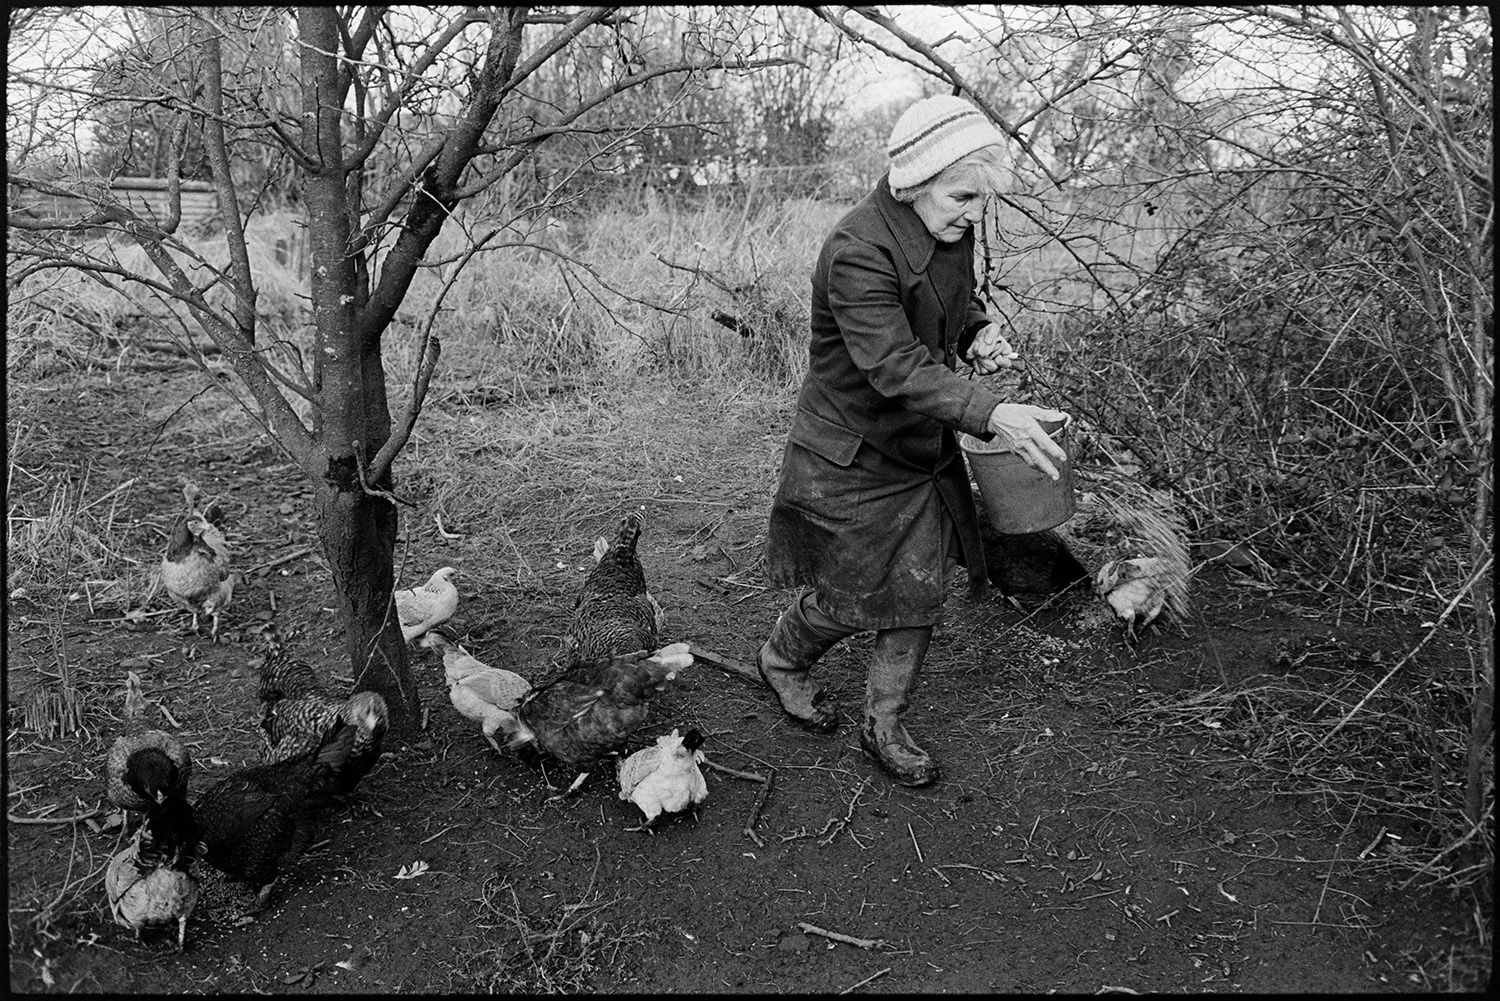 Woman, farmers wife feeding chickens and collecting eggs. 
[Evelyn Folland feeding chickens by bushes and a tree in the farmyard at Higher Upcott, Dowland. She is scattering grain for them from a bucket.]